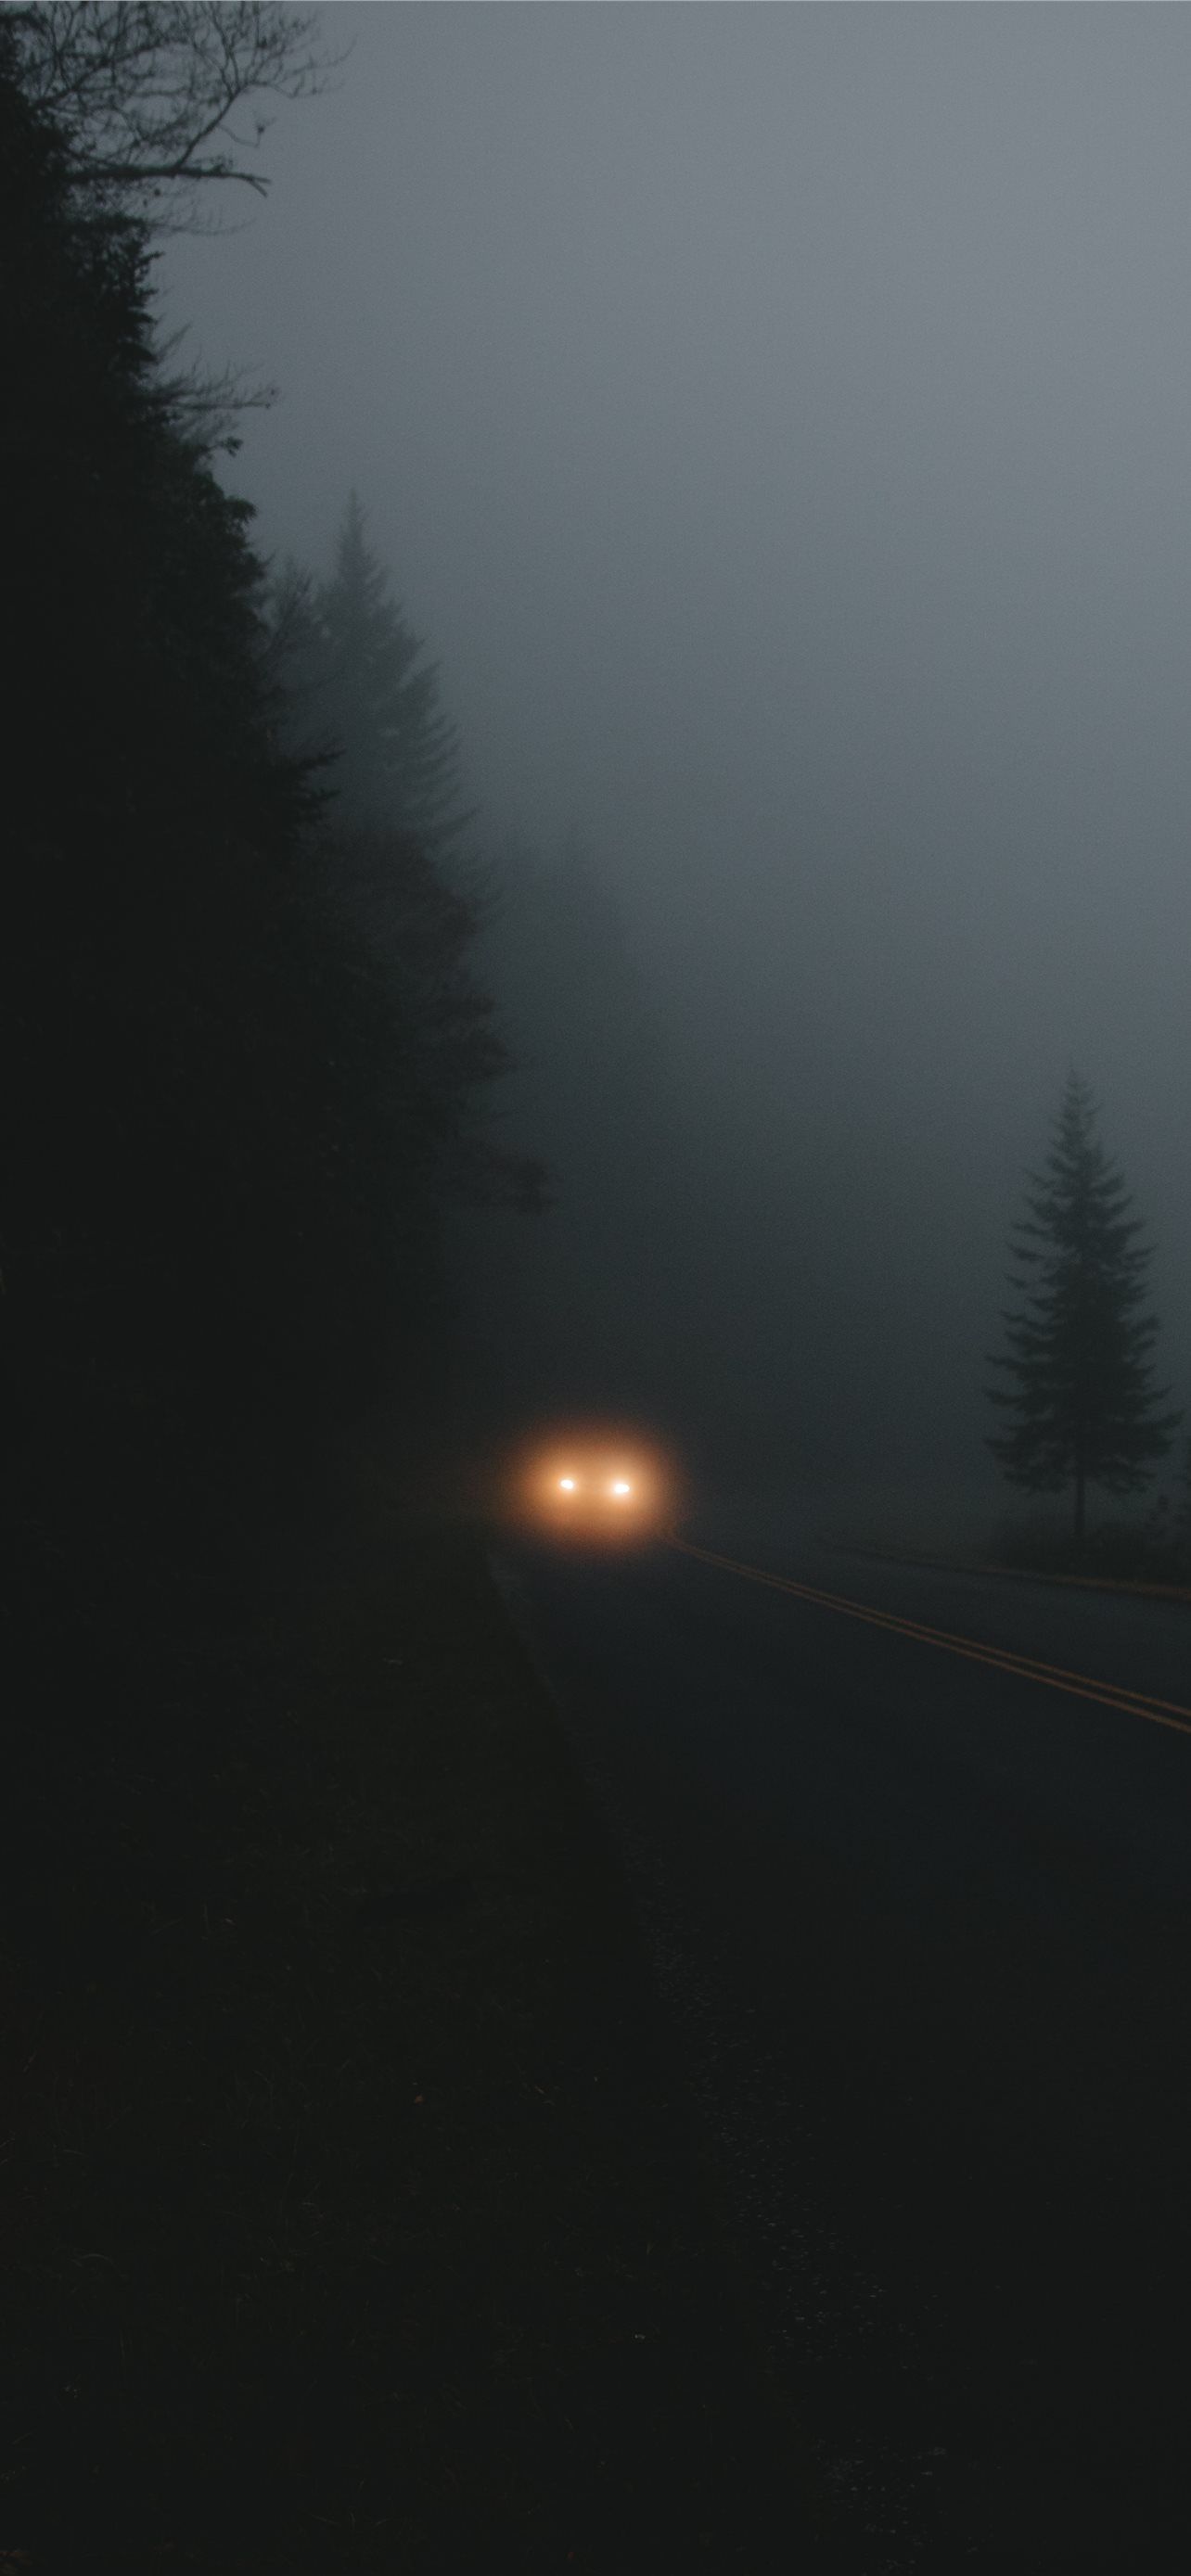 A car driving down the road in fog - Forest